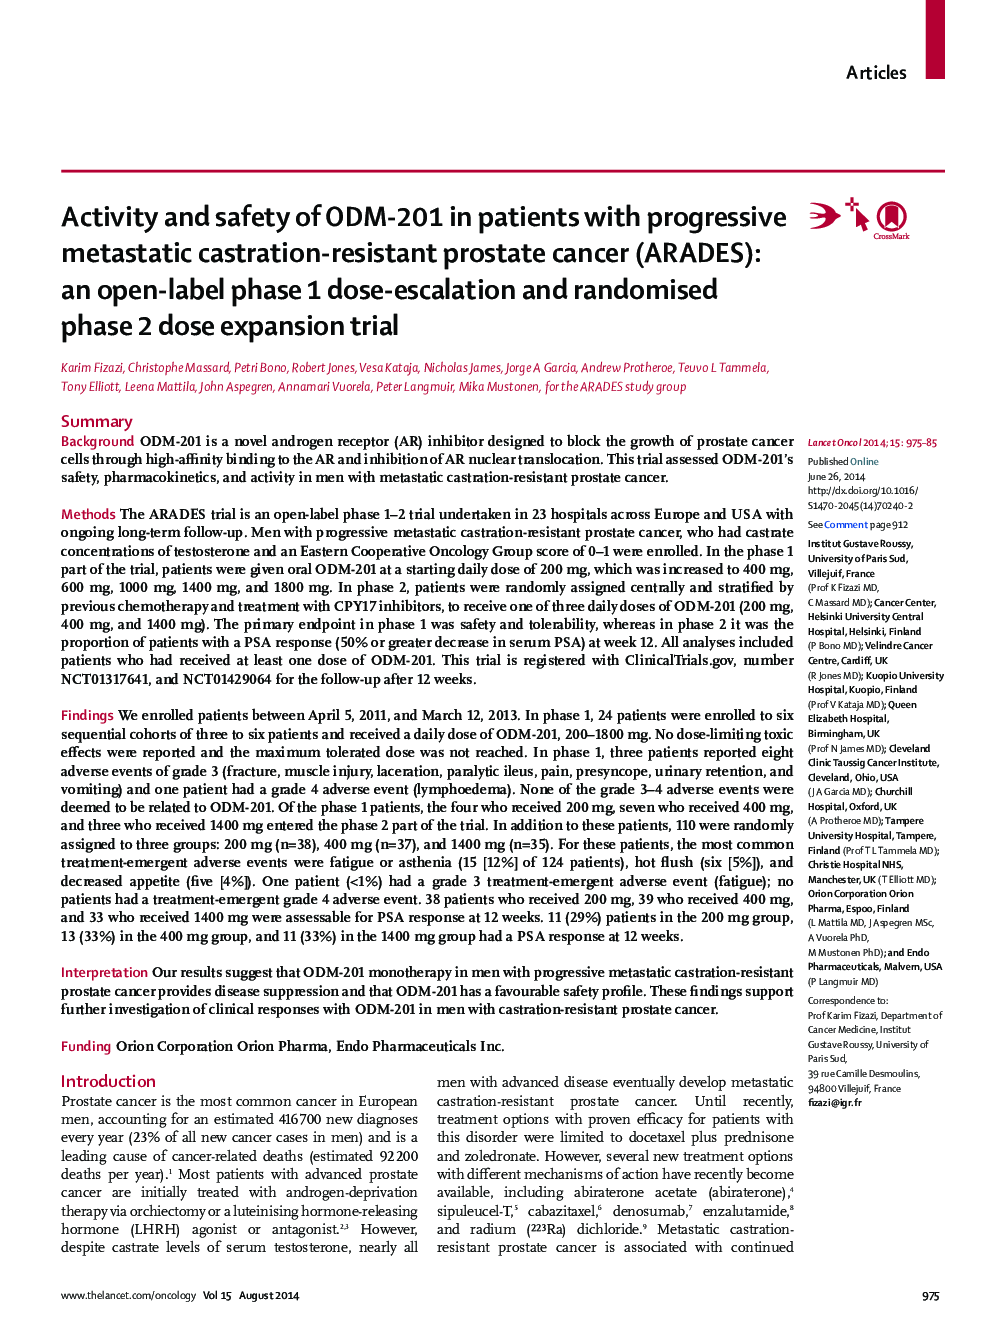 Activity and safety of ODM-201 in patients with progressive metastatic castration-resistant prostate cancer (ARADES): an open-label phase 1 dose-escalation and randomised phase 2 dose expansion trial